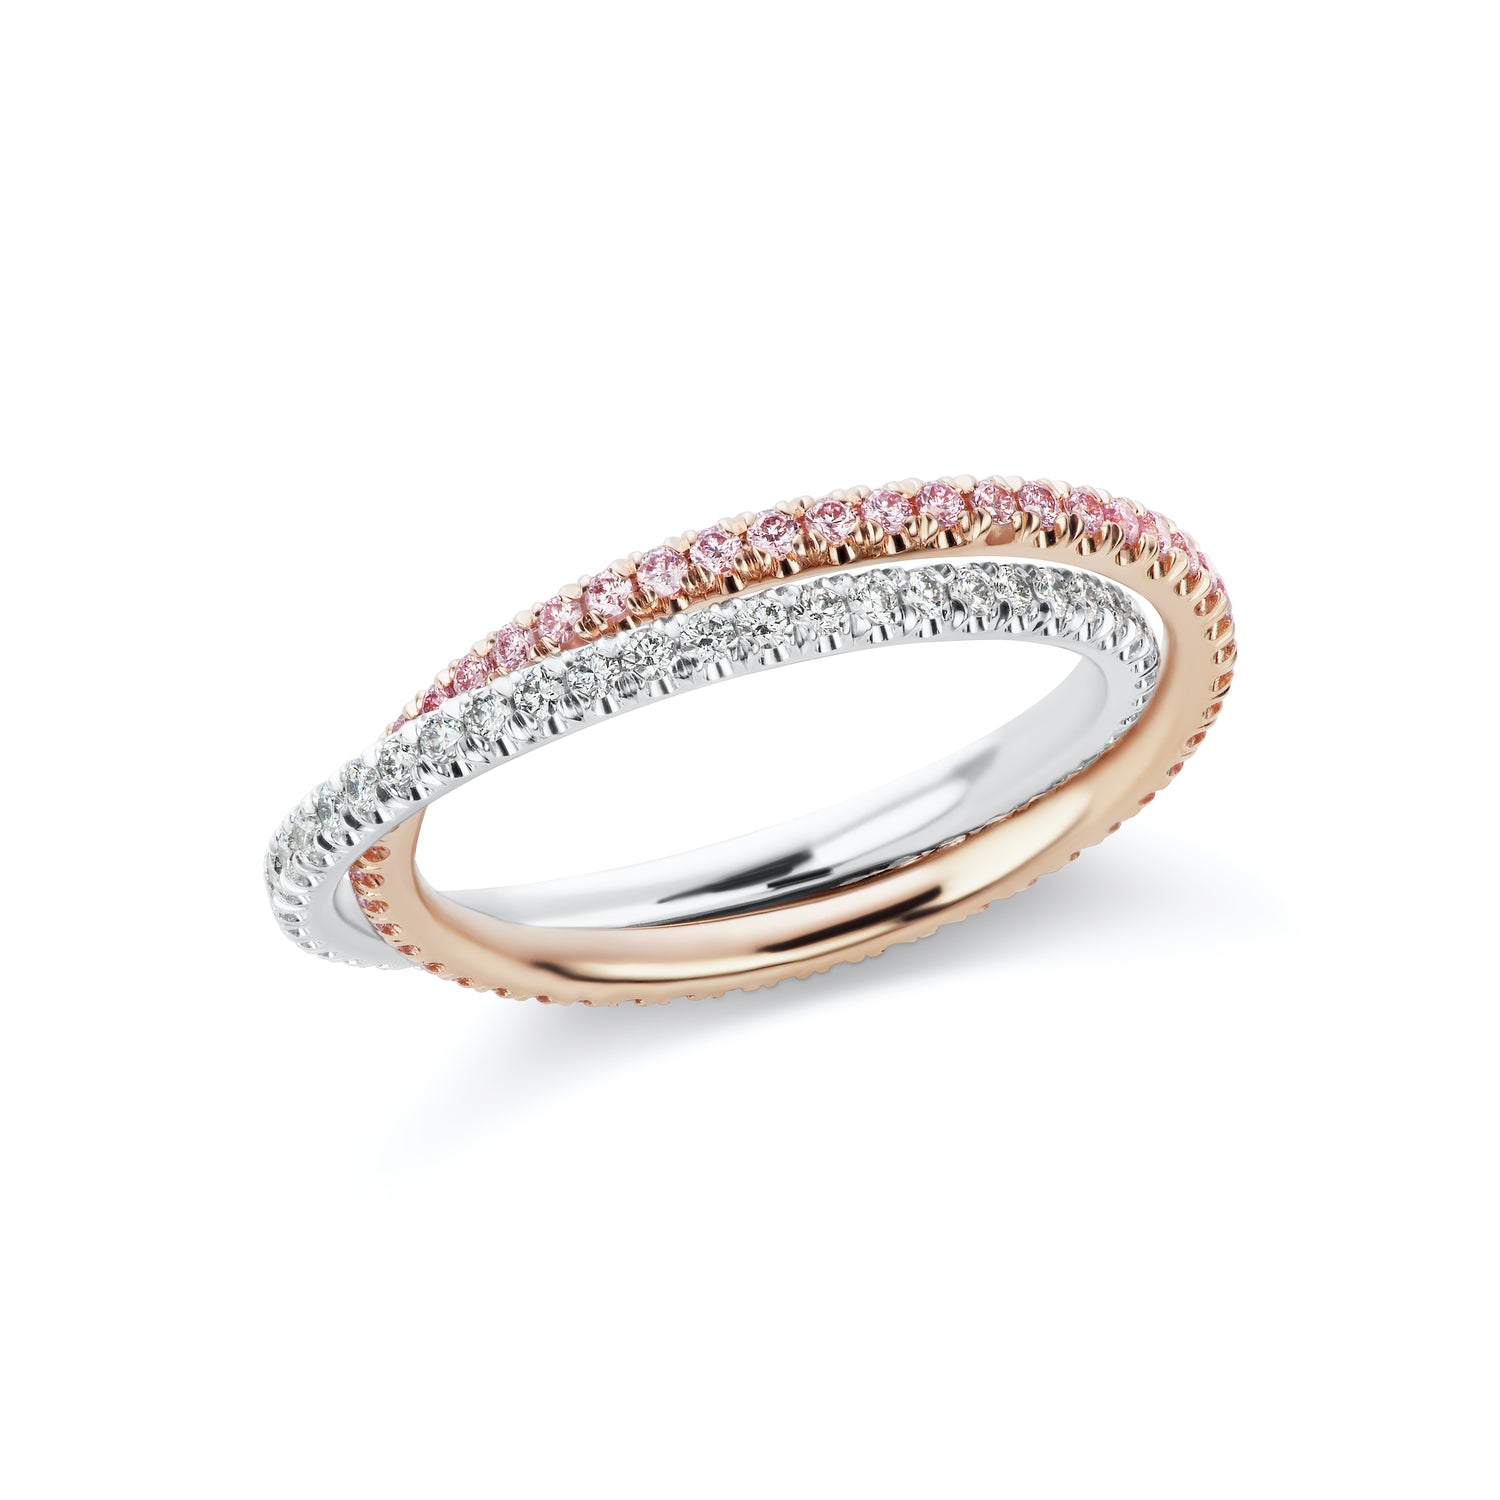 Close up view of the Double Diamond Band, with interlocking eternity bands. One band has white diamonds set in platinum and the other has argyle pink diamonds set in 18k rose gold.